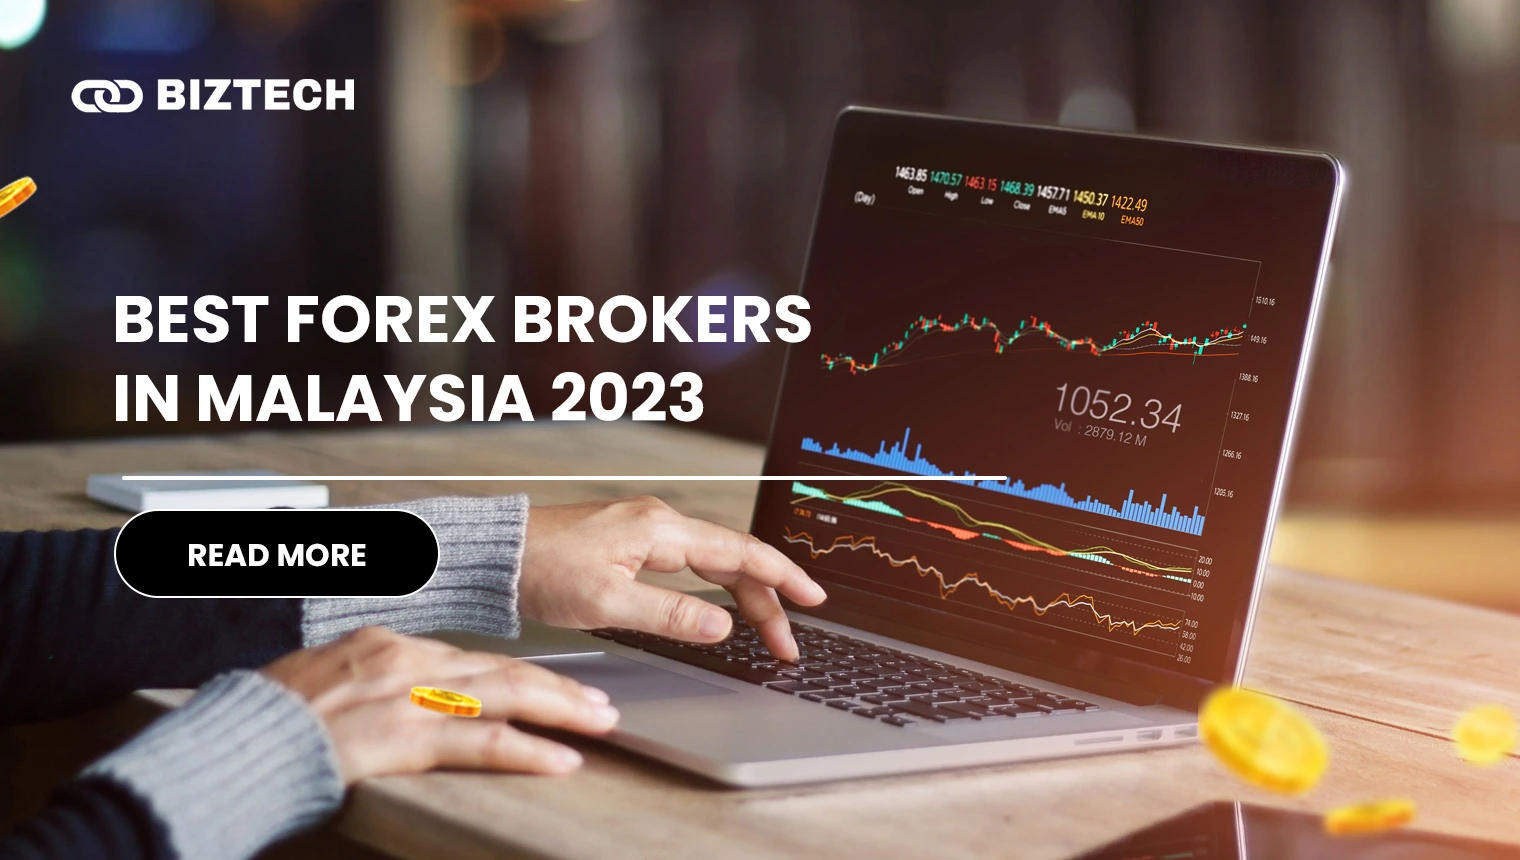 Best Forex Brokers in Malaysia 2023